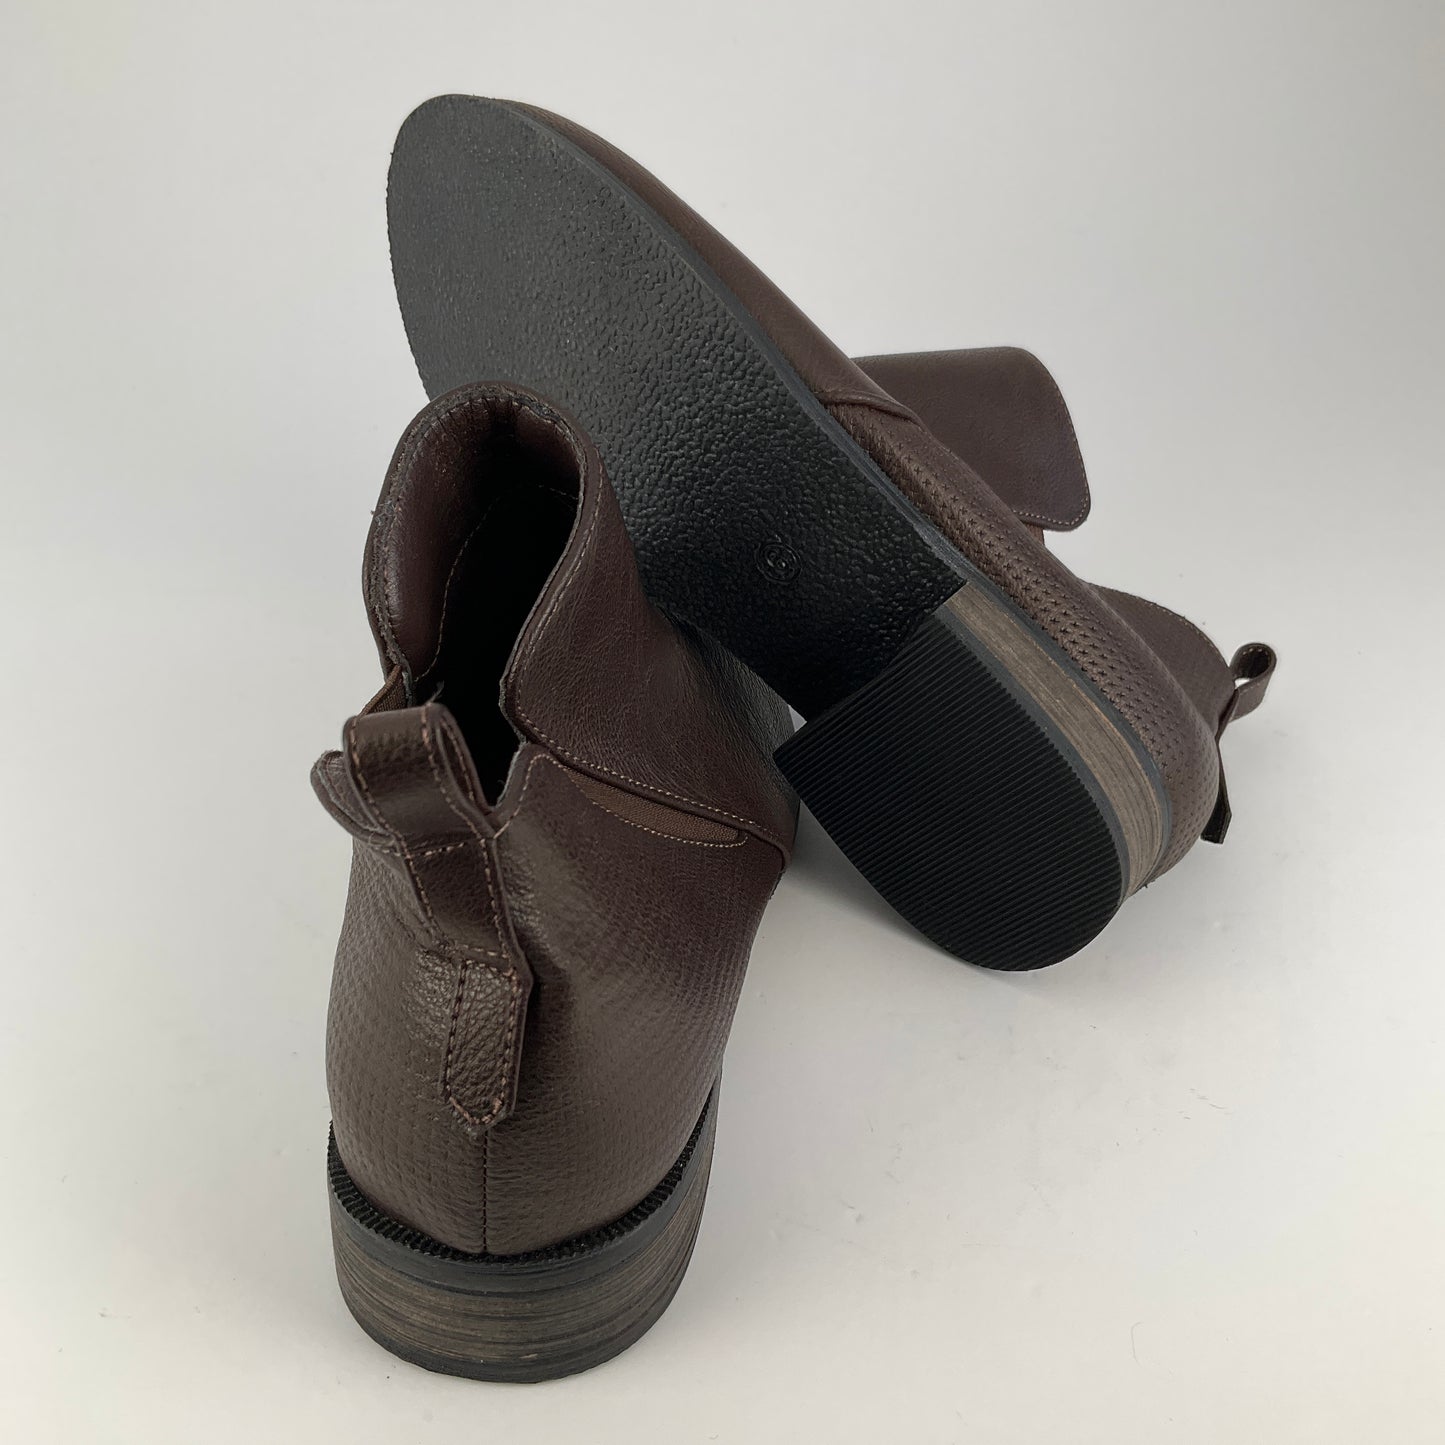 Step on Air - Ankle Boots - Size 6